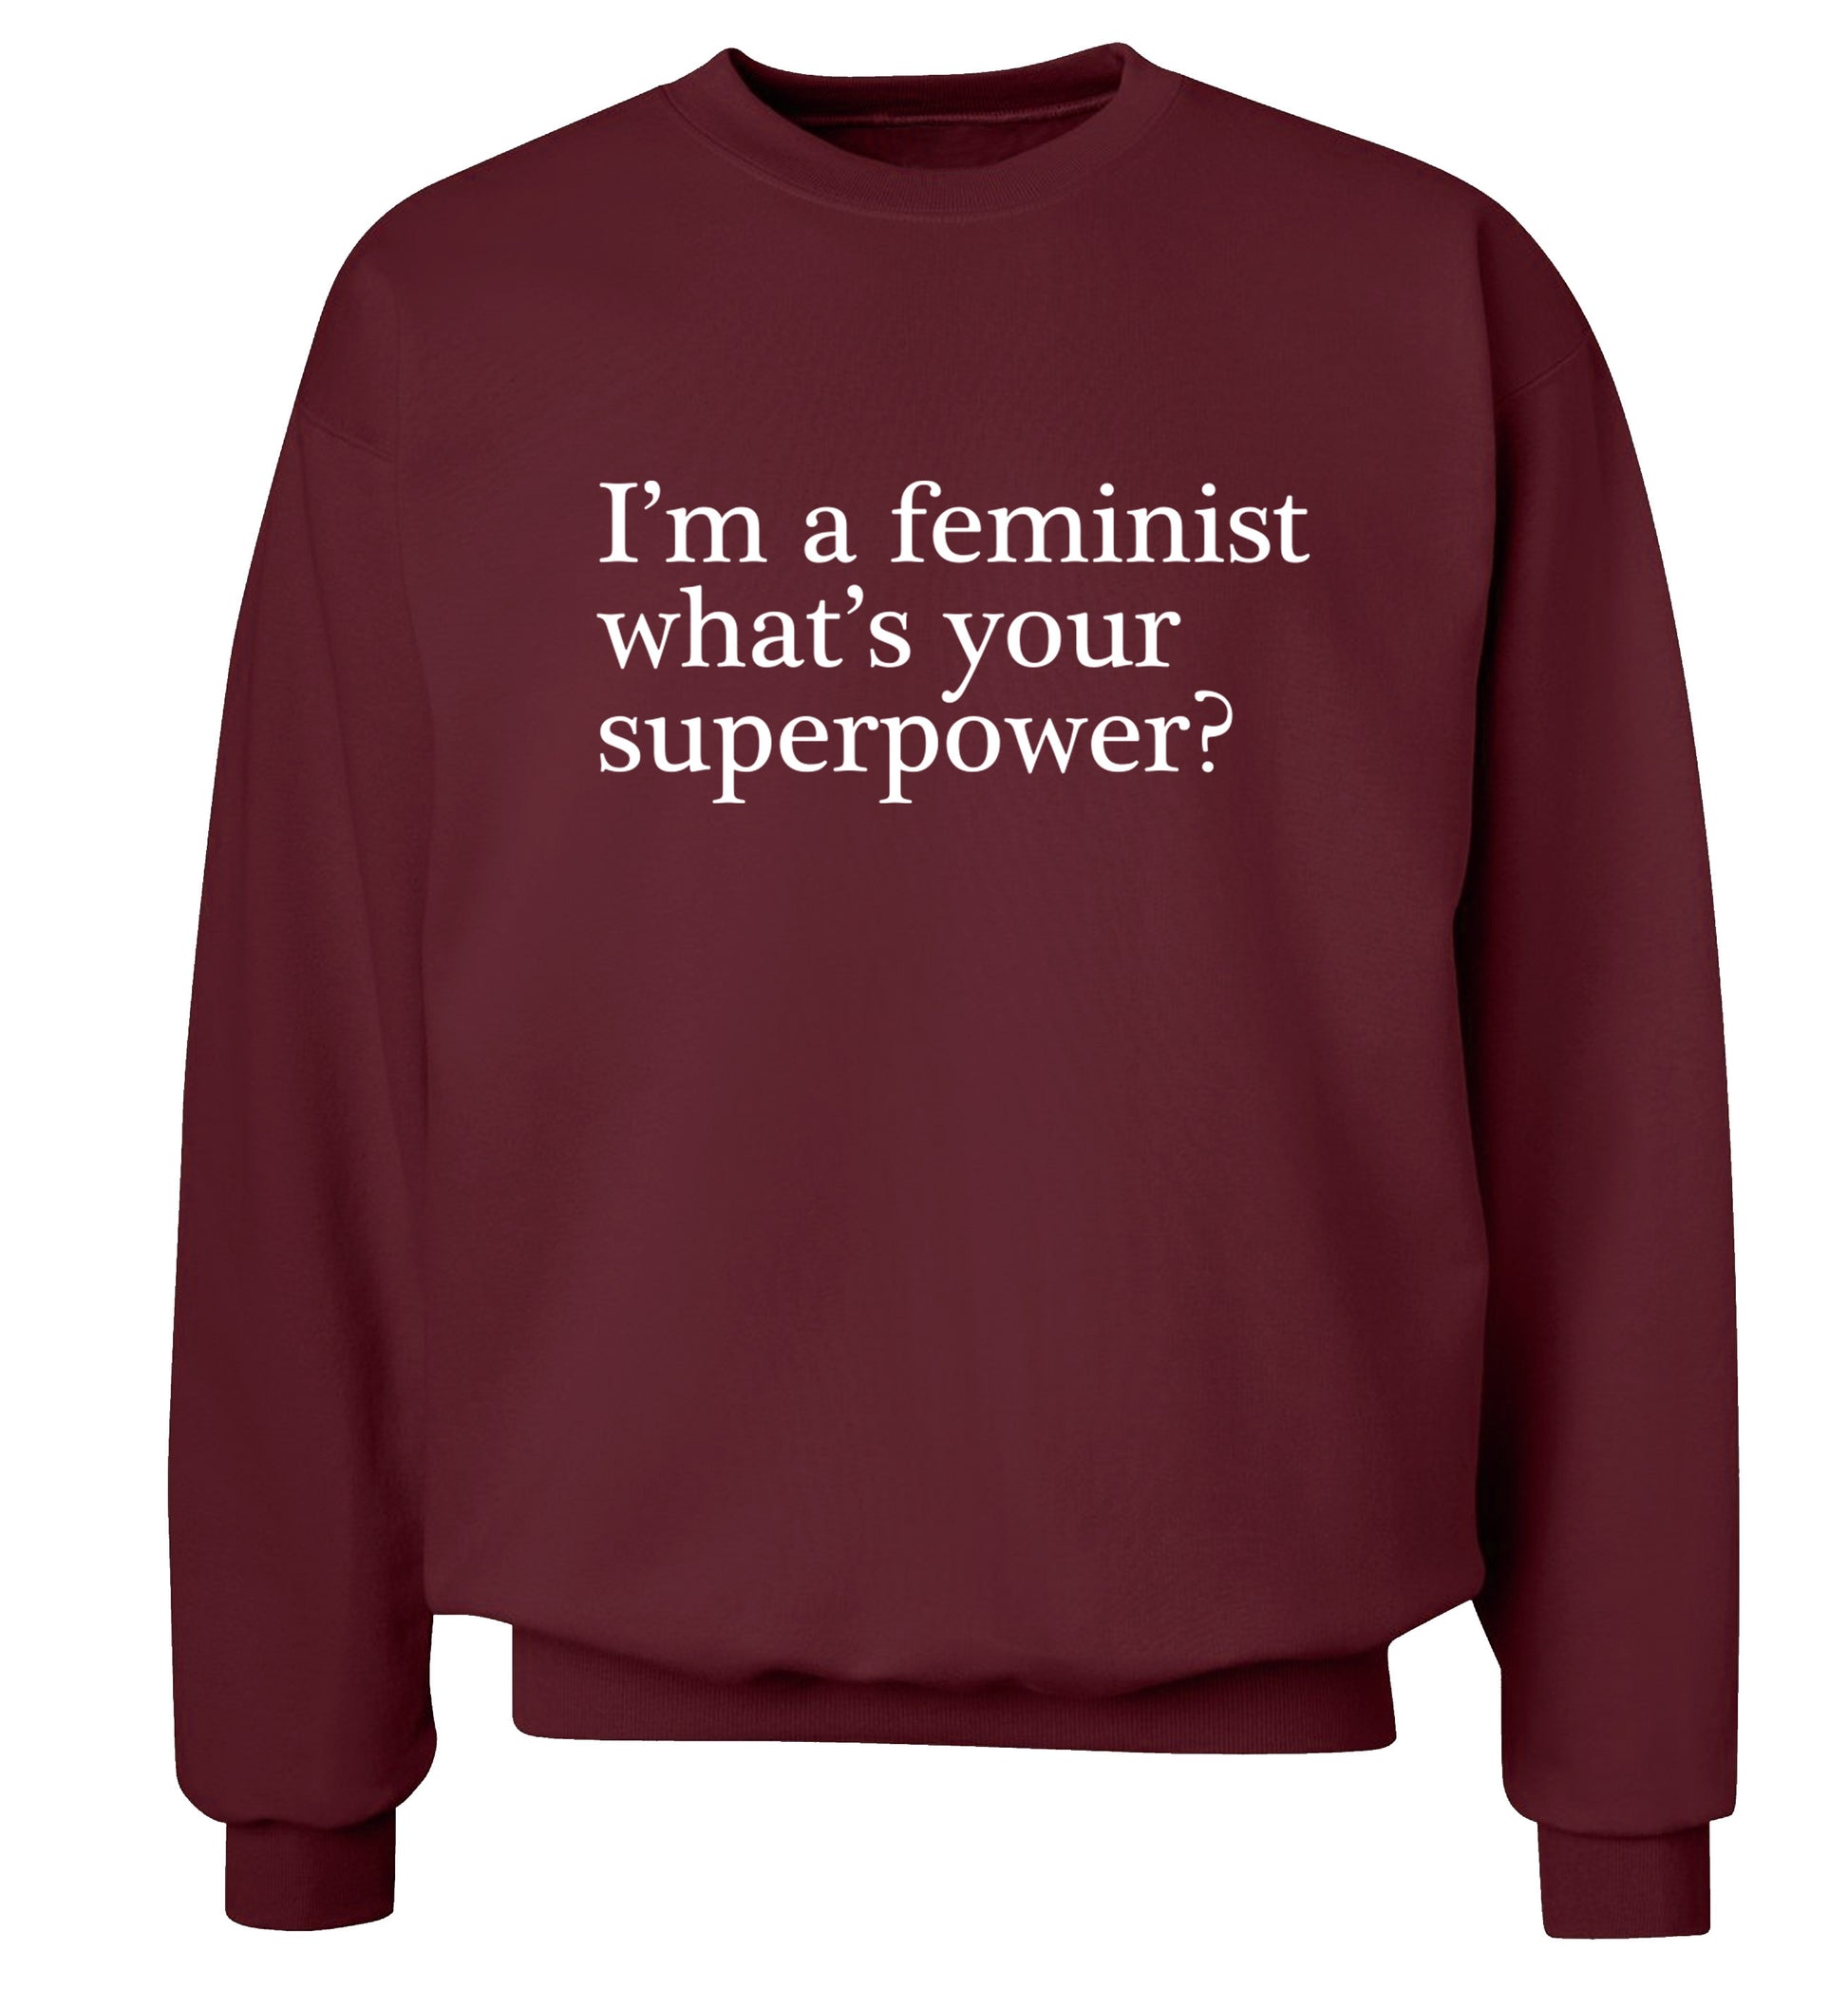 I'm a feminist what's your superpower? Adult's unisex maroon Sweater 2XL